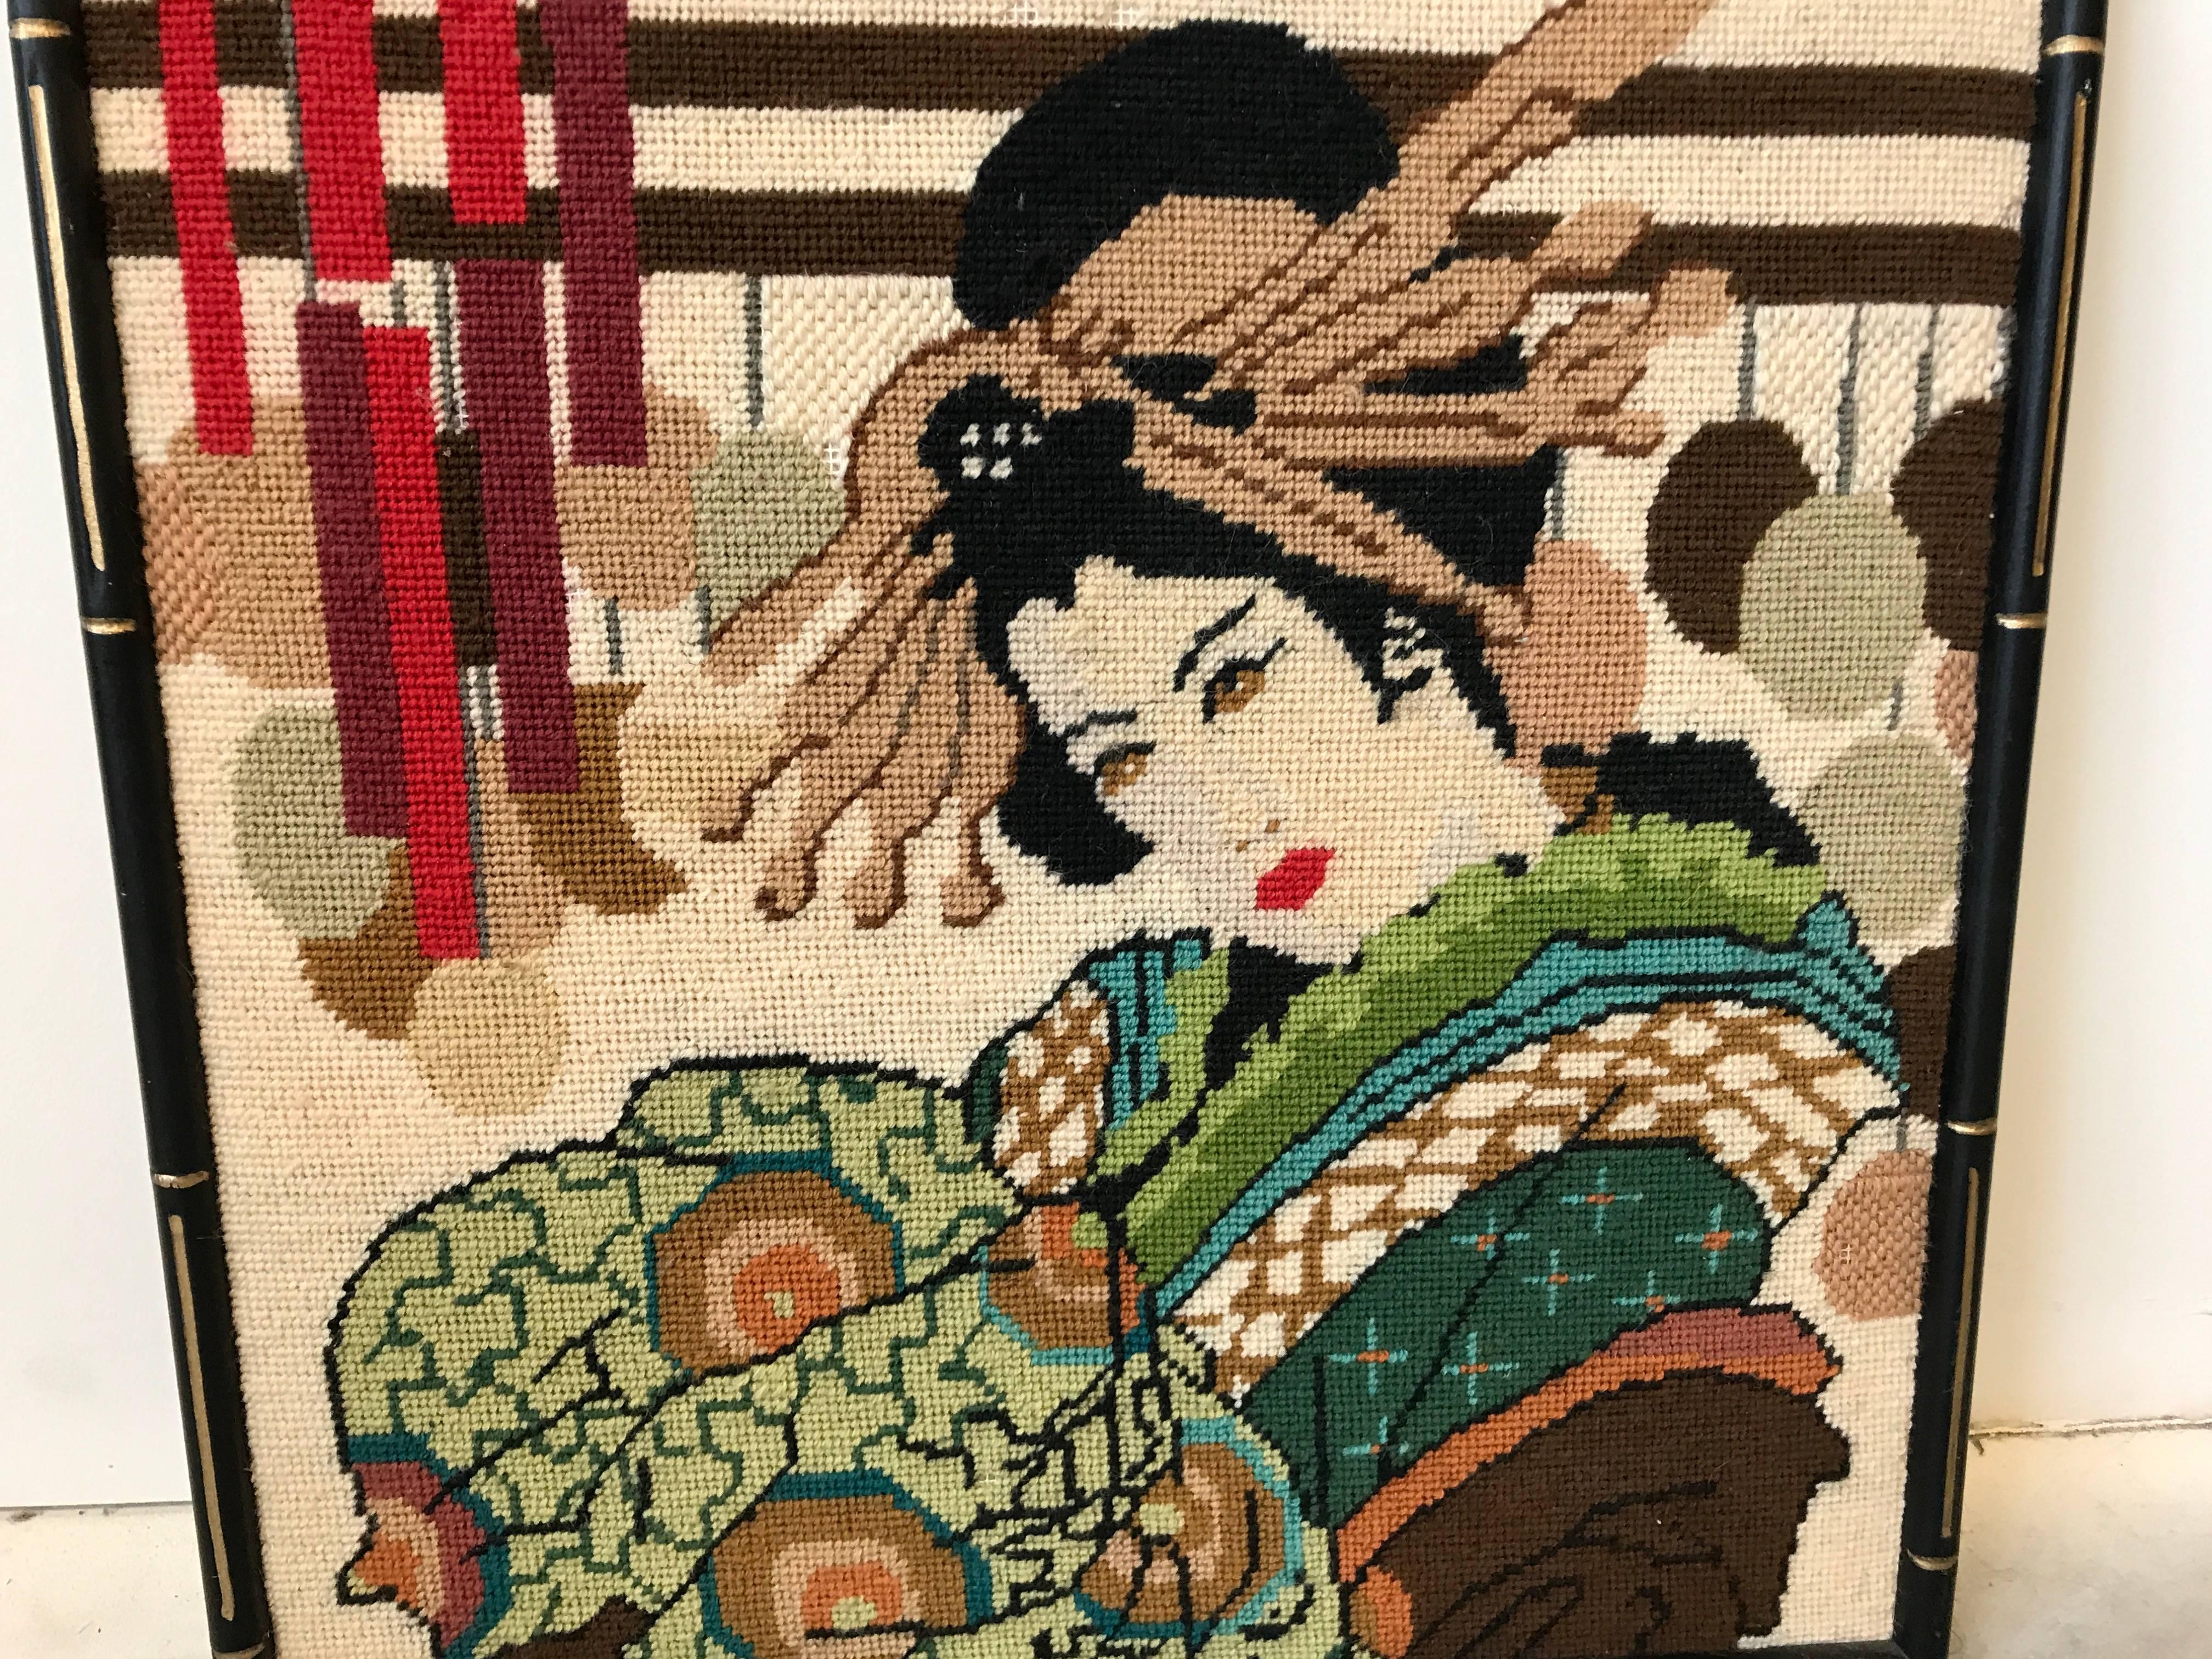 Offered is a fabulous, 1960s needlepoint Geisha in a black faux bamboo frame. Can easily be converted into a needlepoint pillow by removing frame and sewing a backside to it.